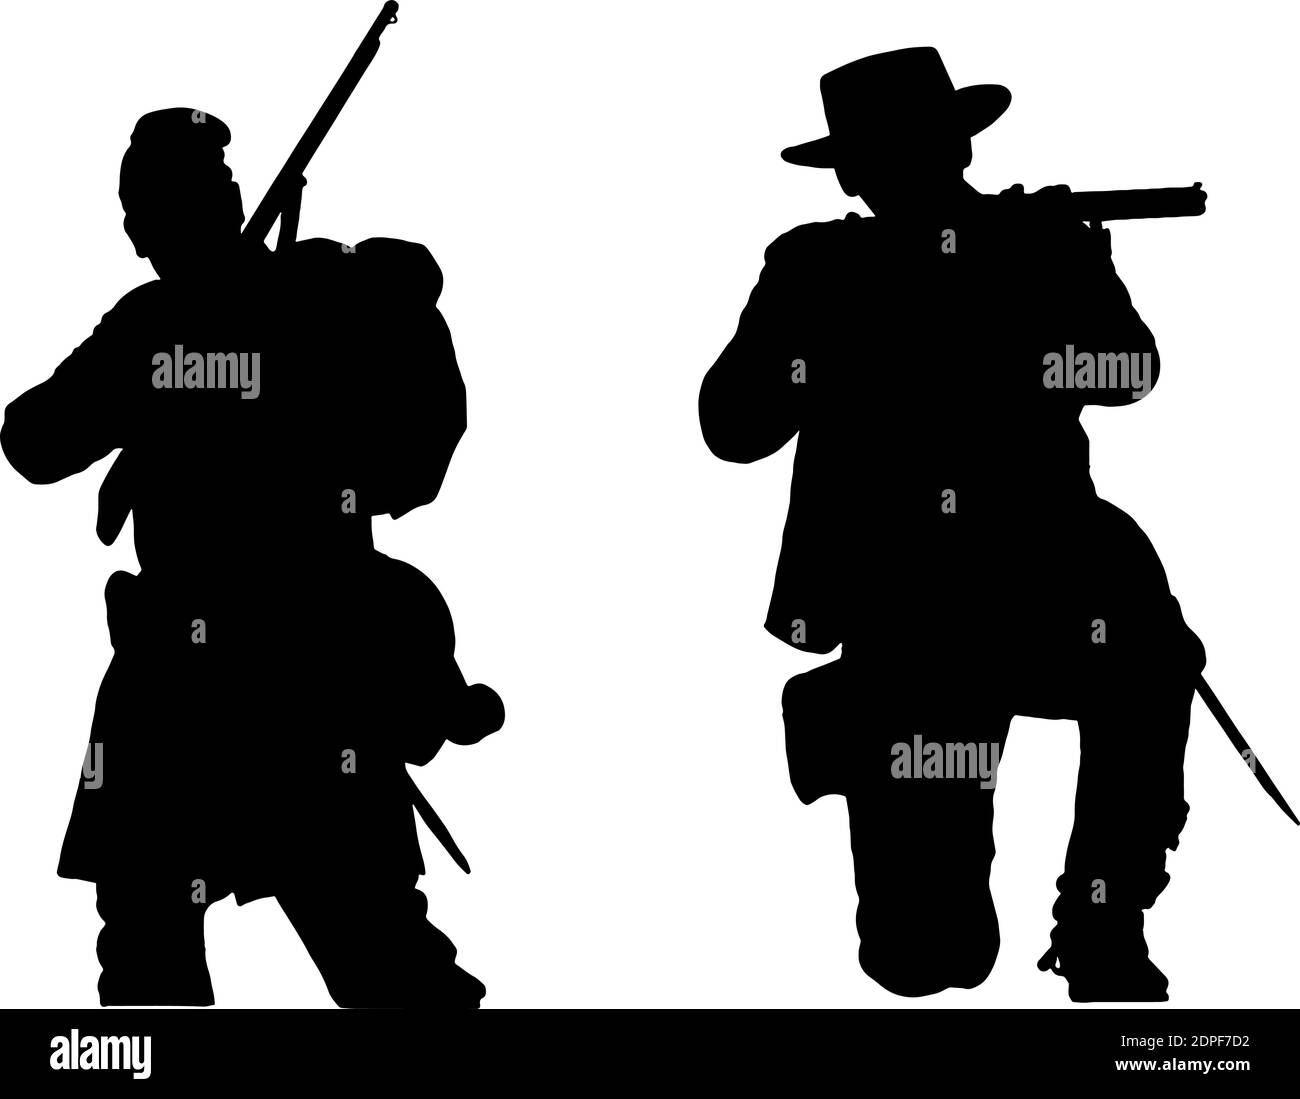 American Civil war soldiers silhouettes in black on white background Stock Vector